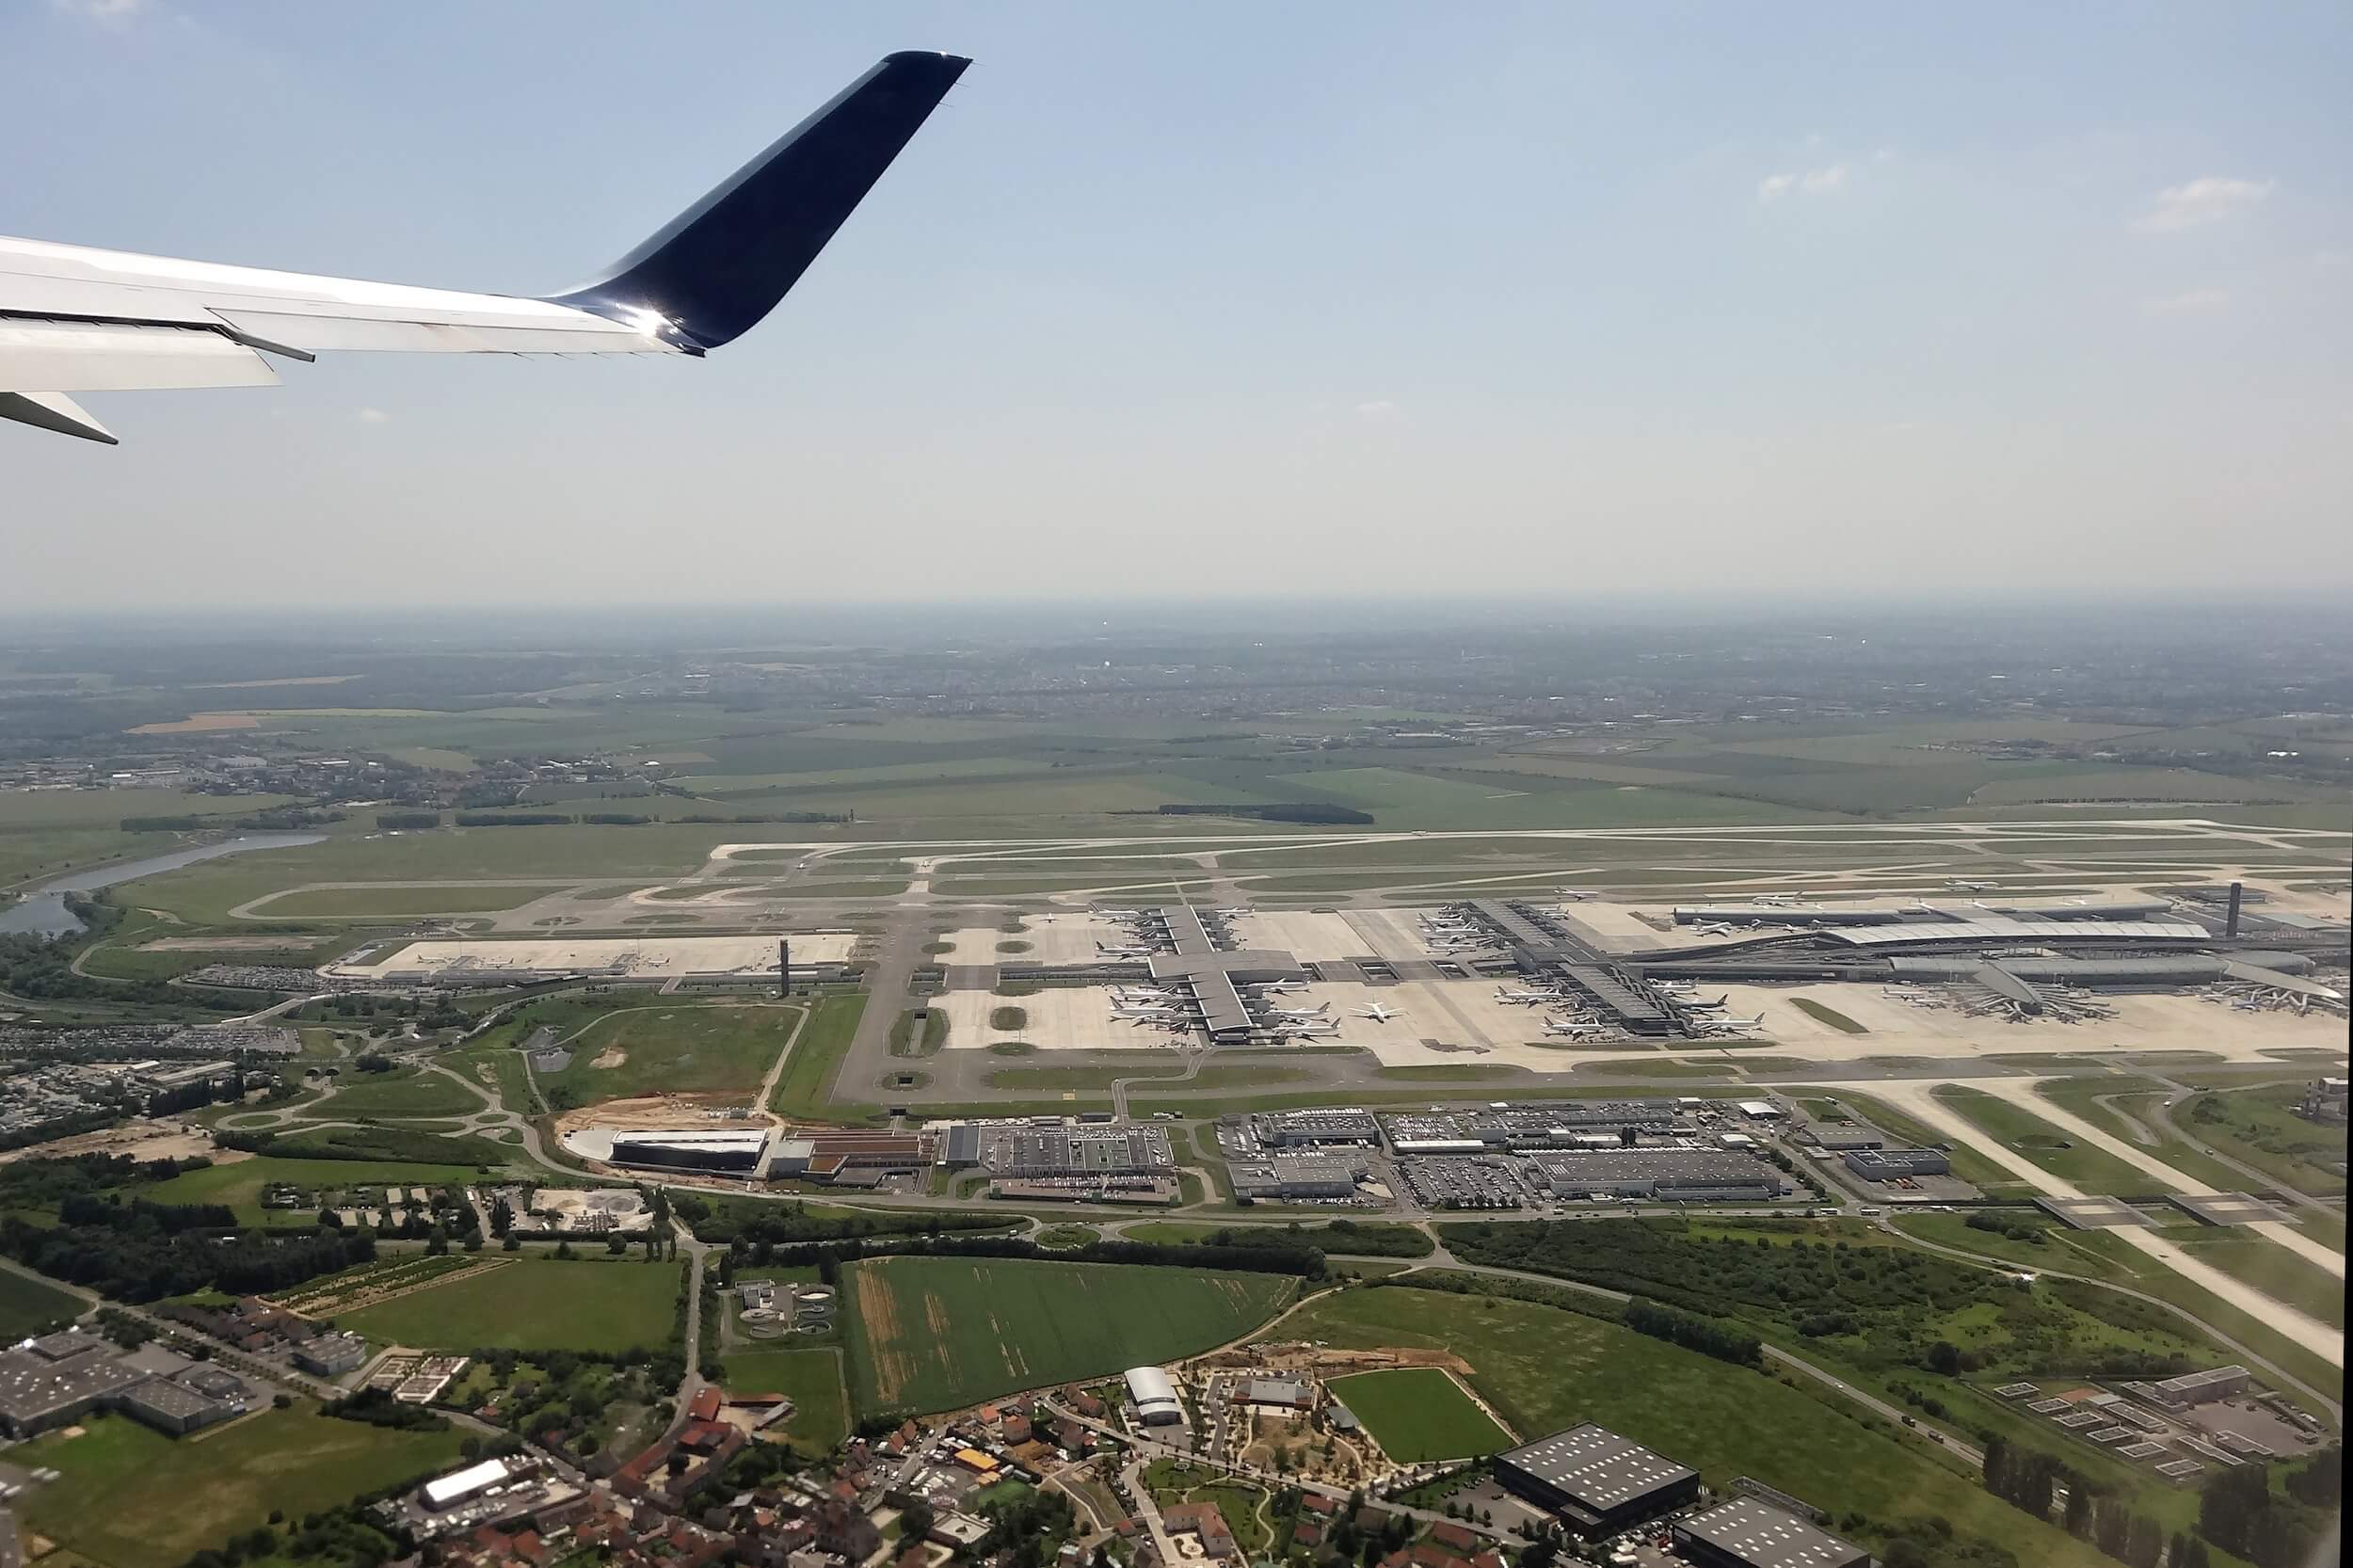 18 Things to do in Charles de Gaulle Airport 